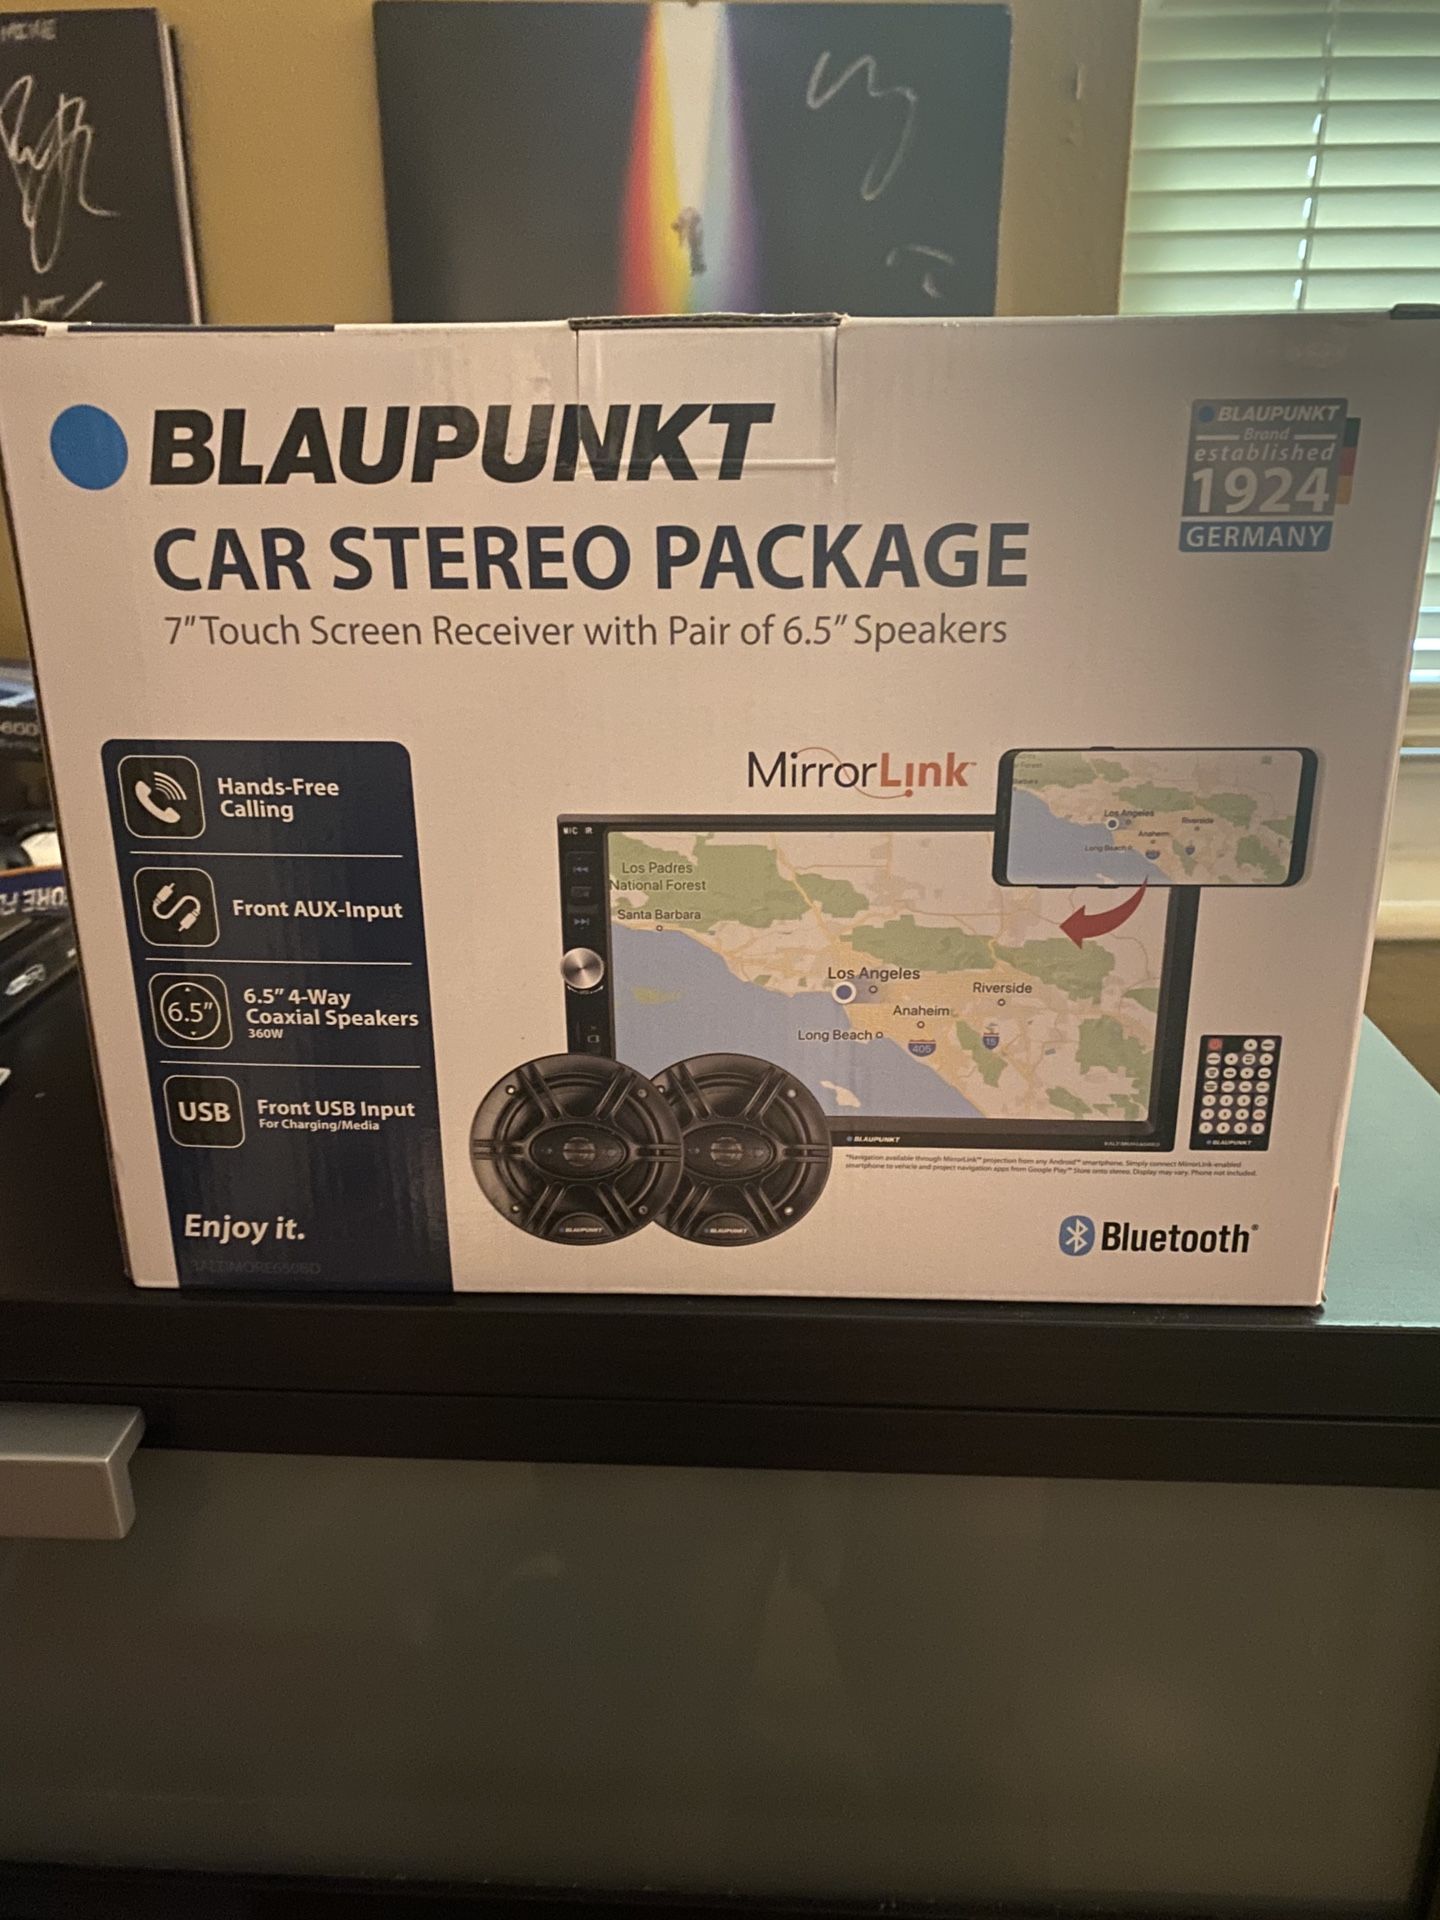 Blaupunkt Baltimore 7" Touch Screen Receiver Pair of 6.5" Speaker Car Stereo